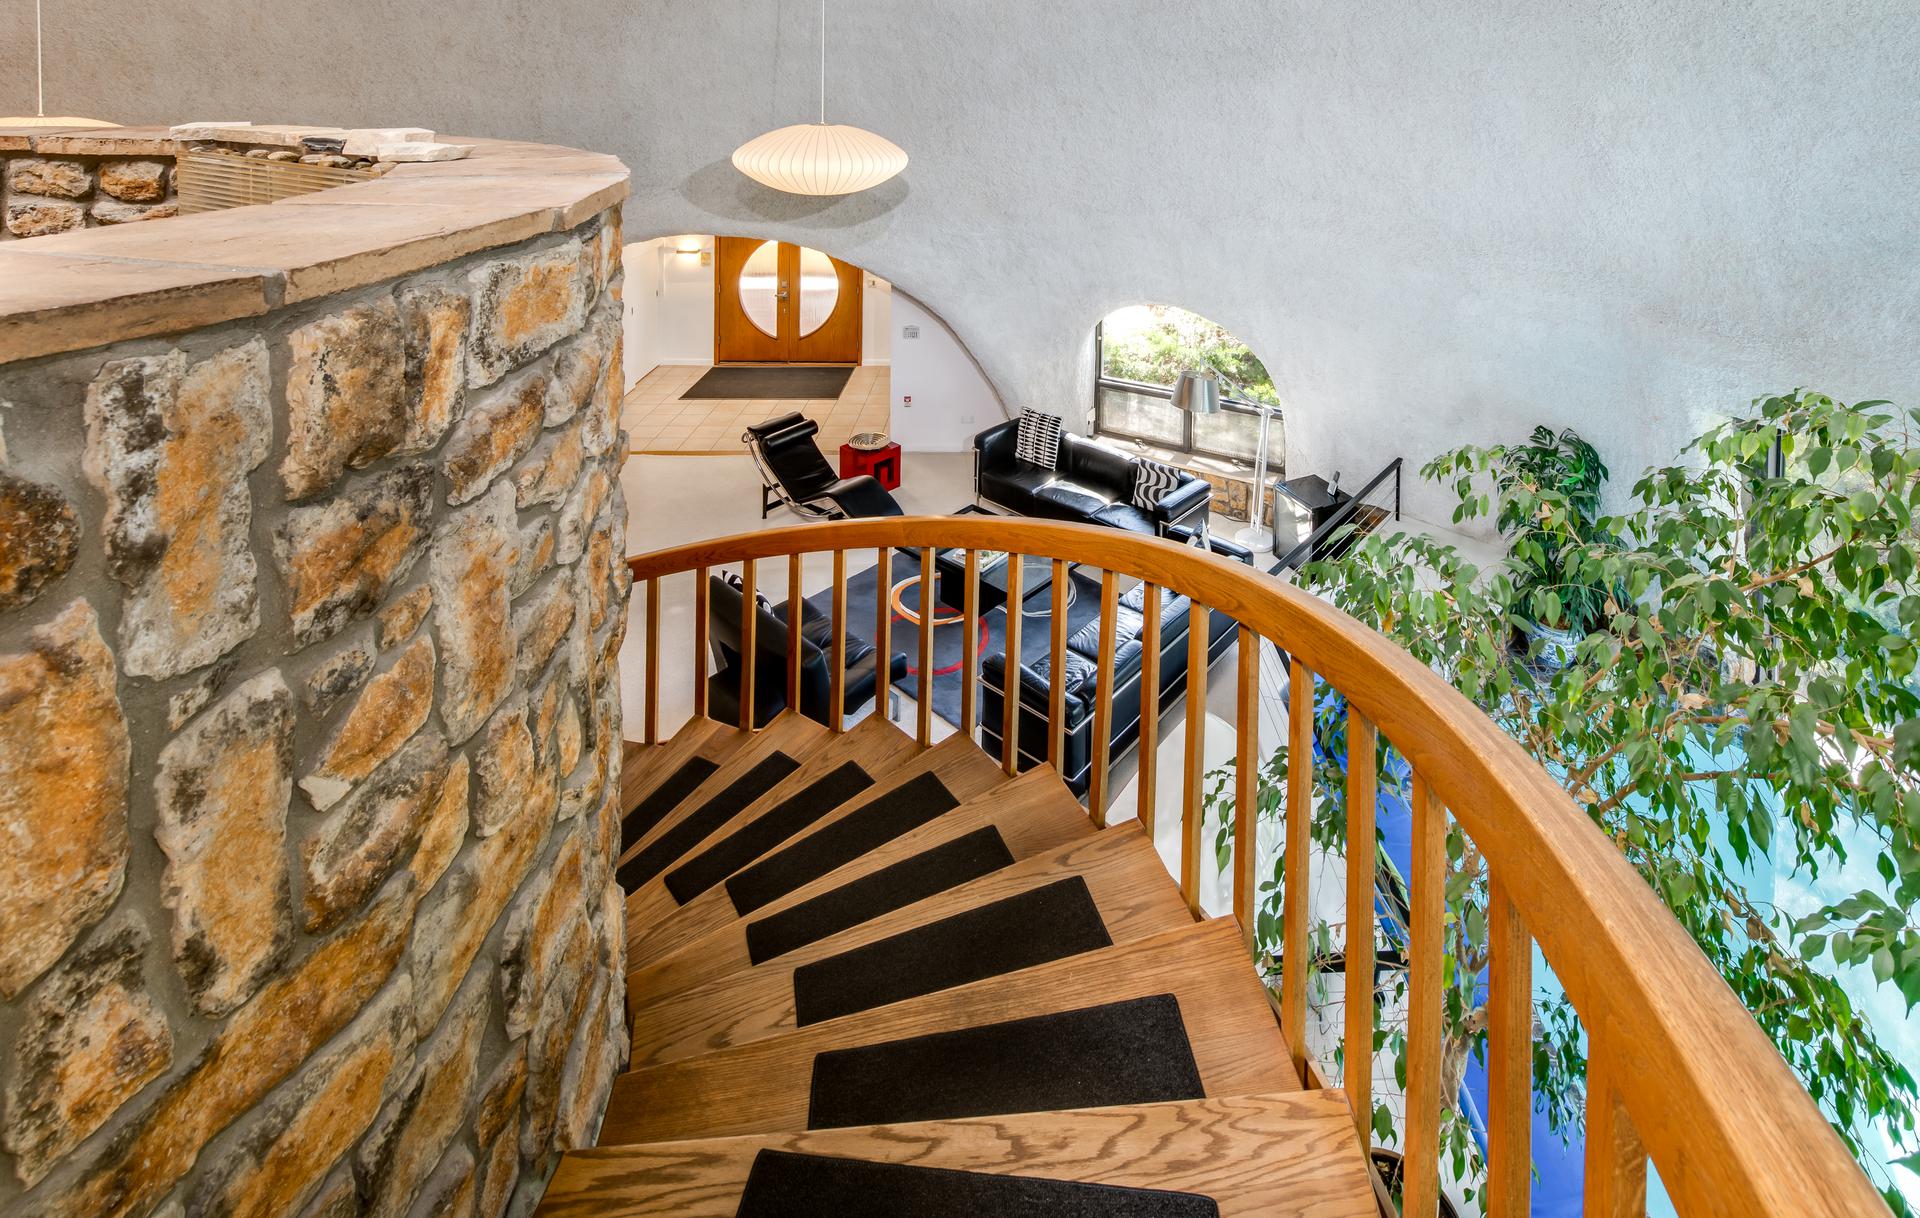 Curved stairs